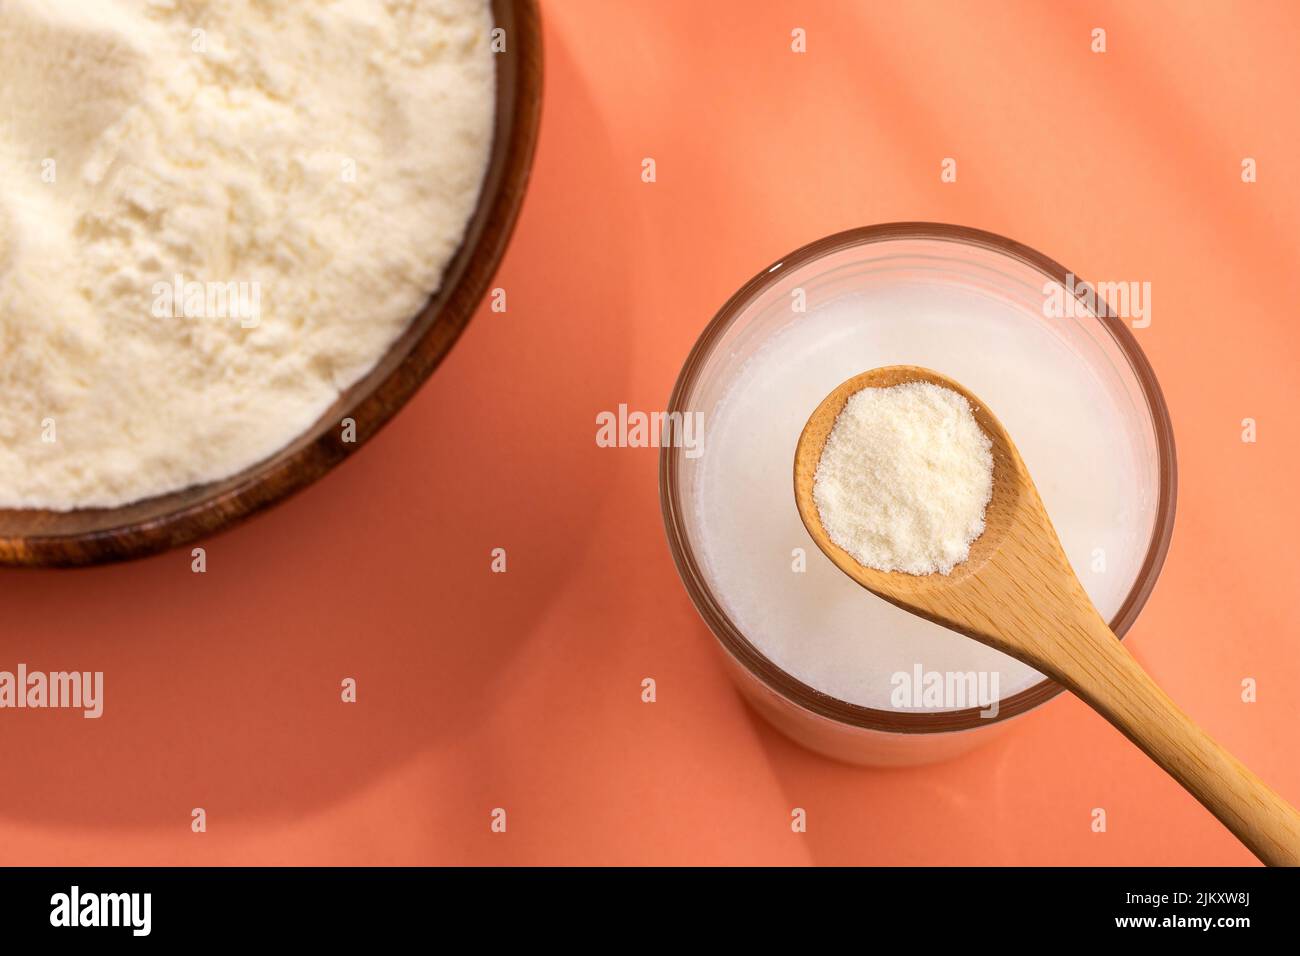 Powdered milk mix in the glass with water Stock Photo